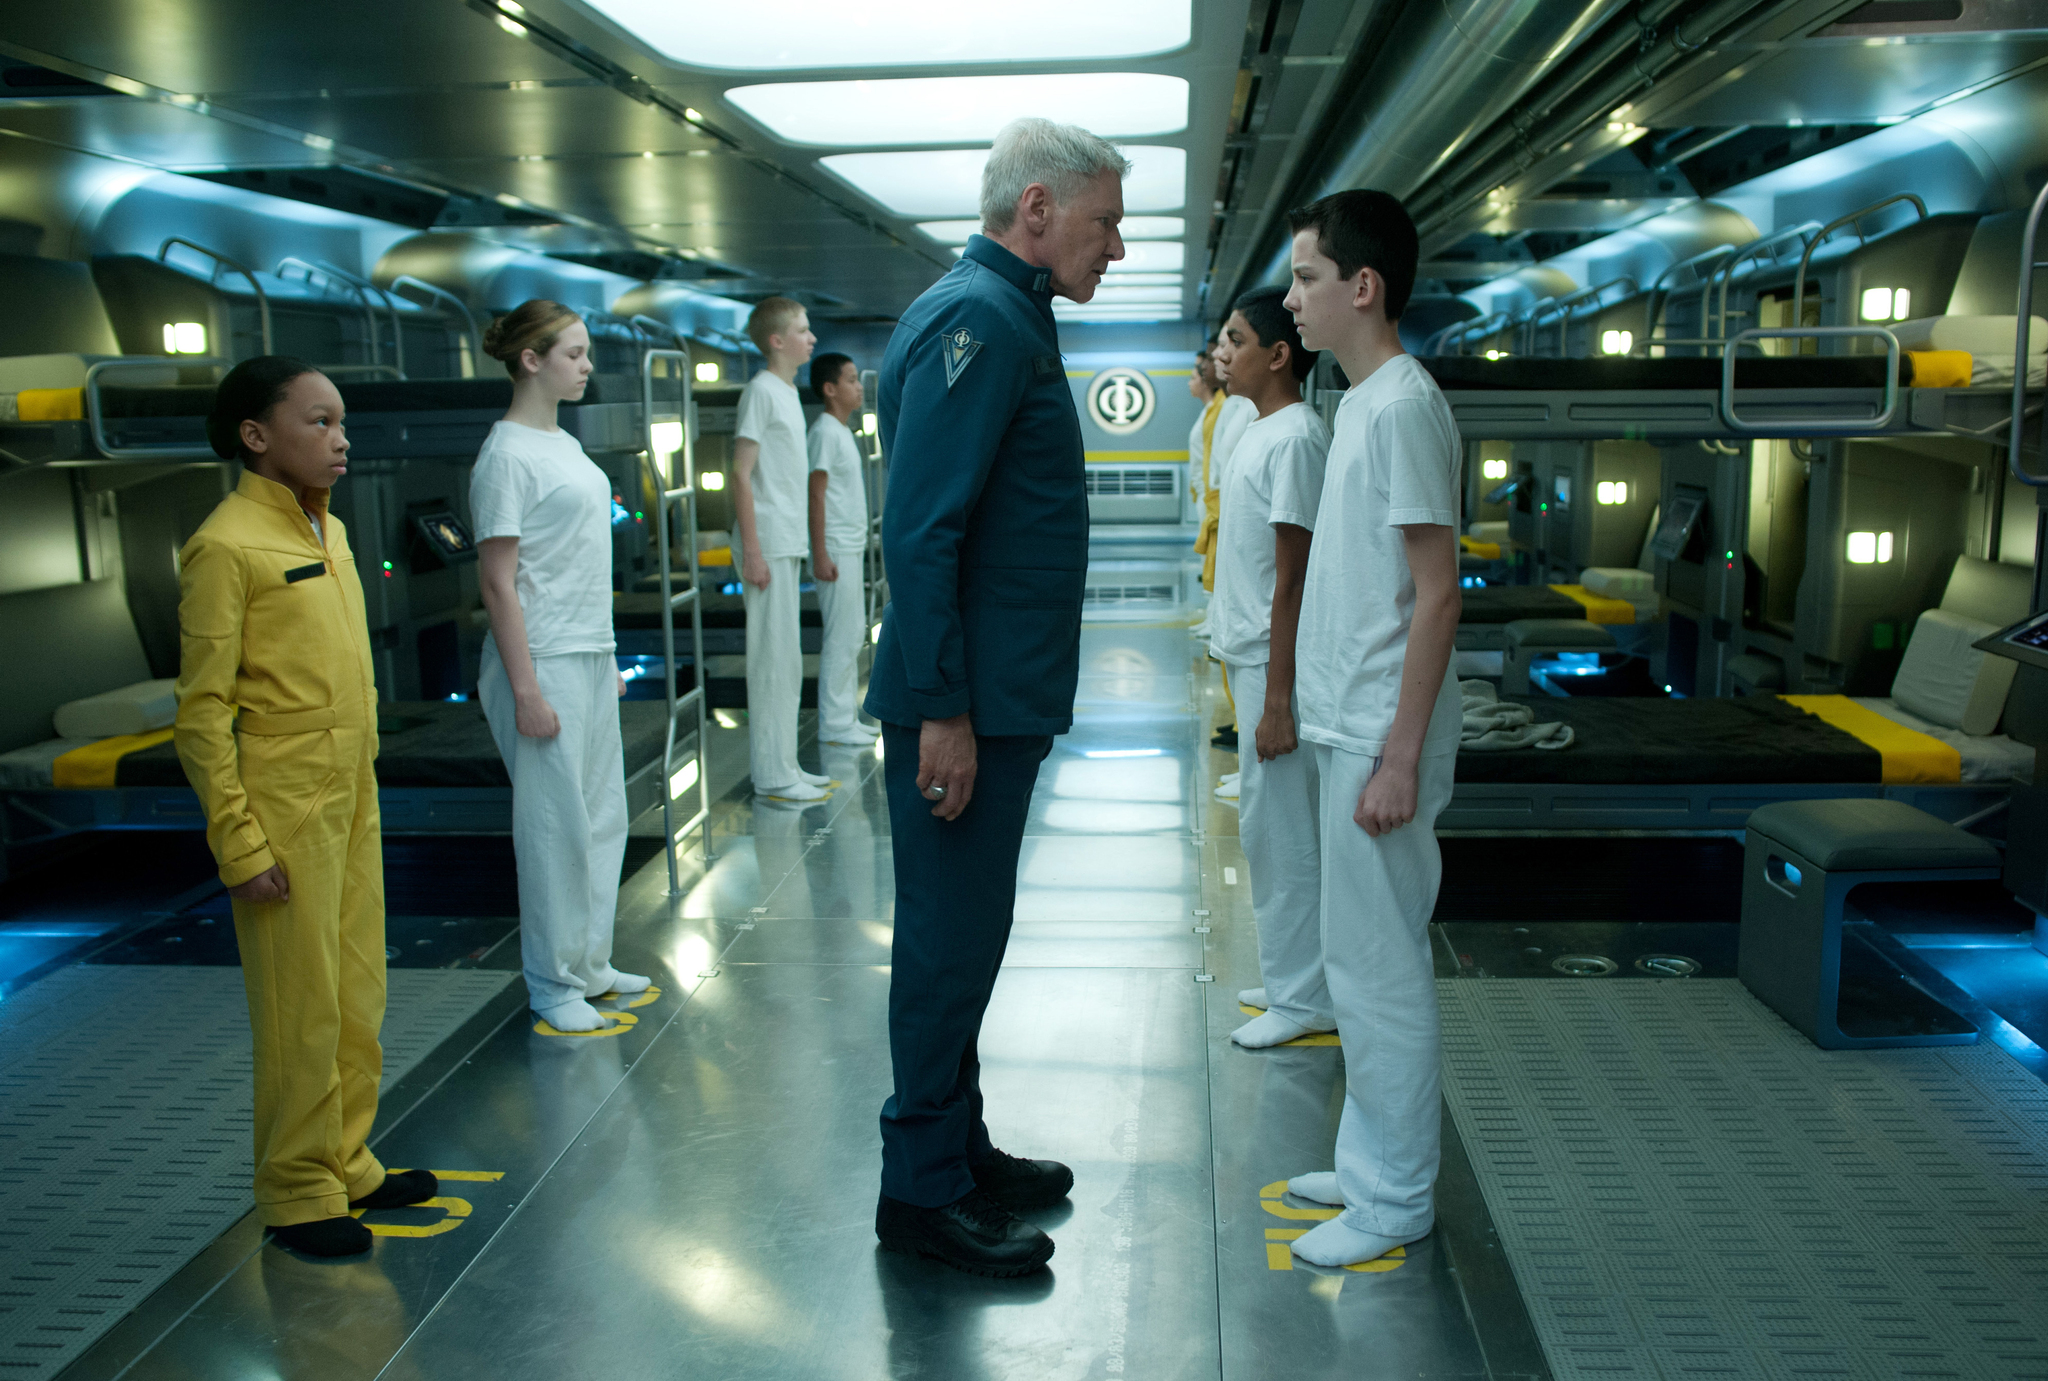 Still of Harrison Ford and Asa Butterfield in Enderio zaidimas (2013)